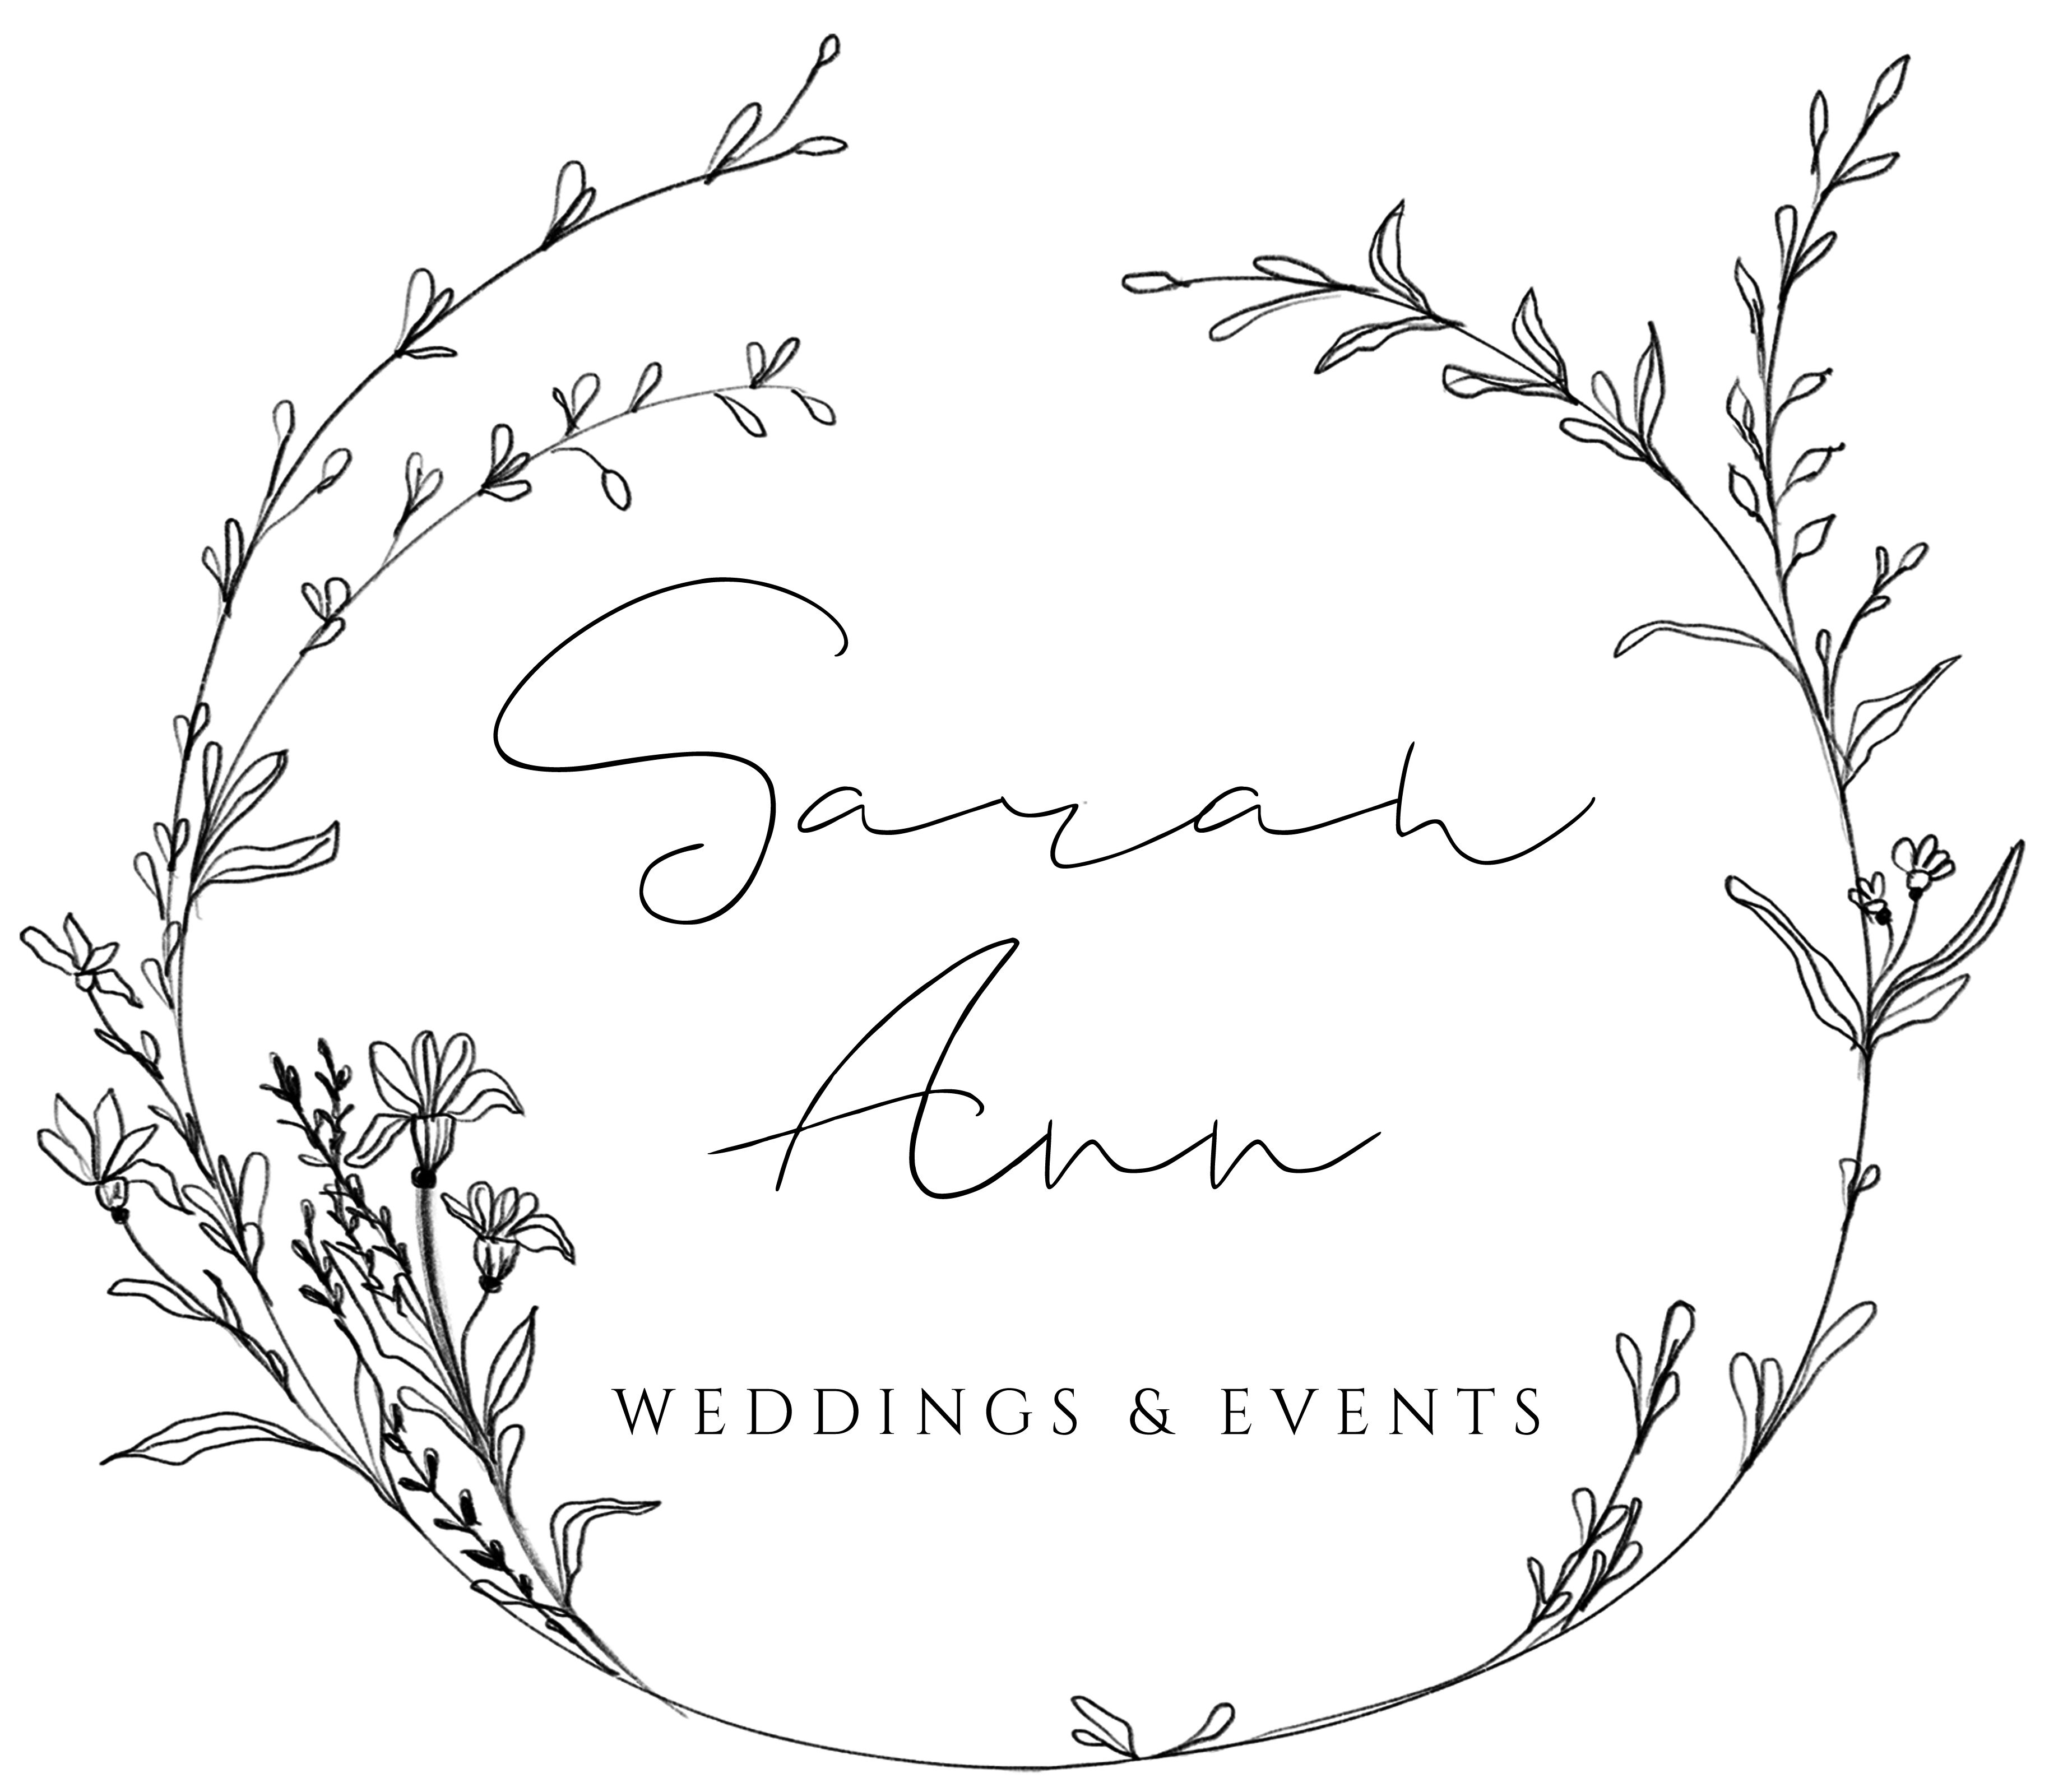 Sarah Ann Weddings and Events | Wedding Planners - The Knot